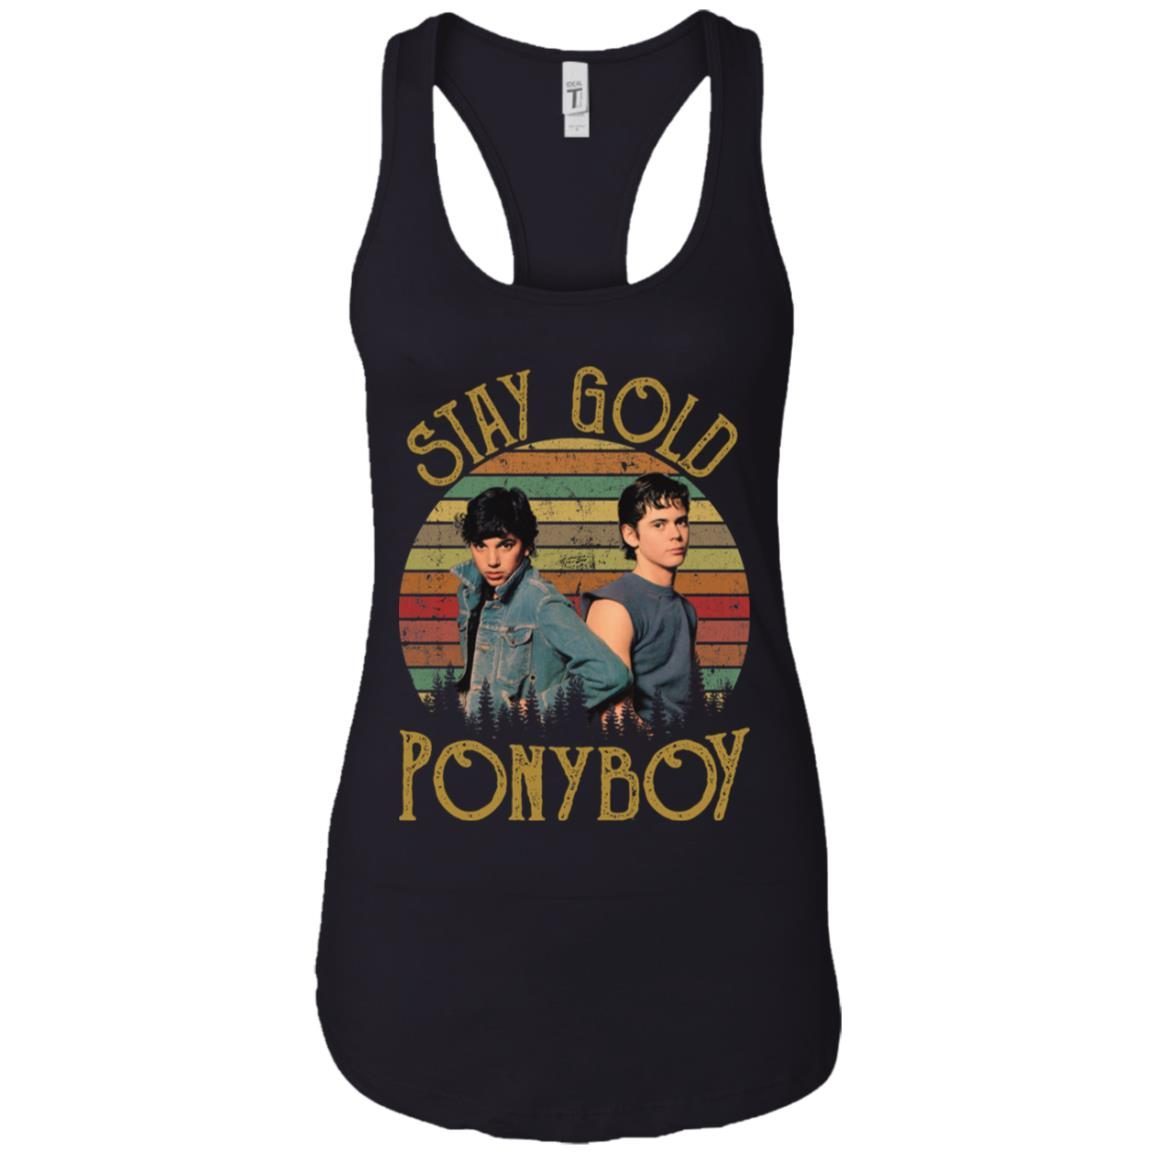 The Outsiders Stay Gold Ponyboy shirt